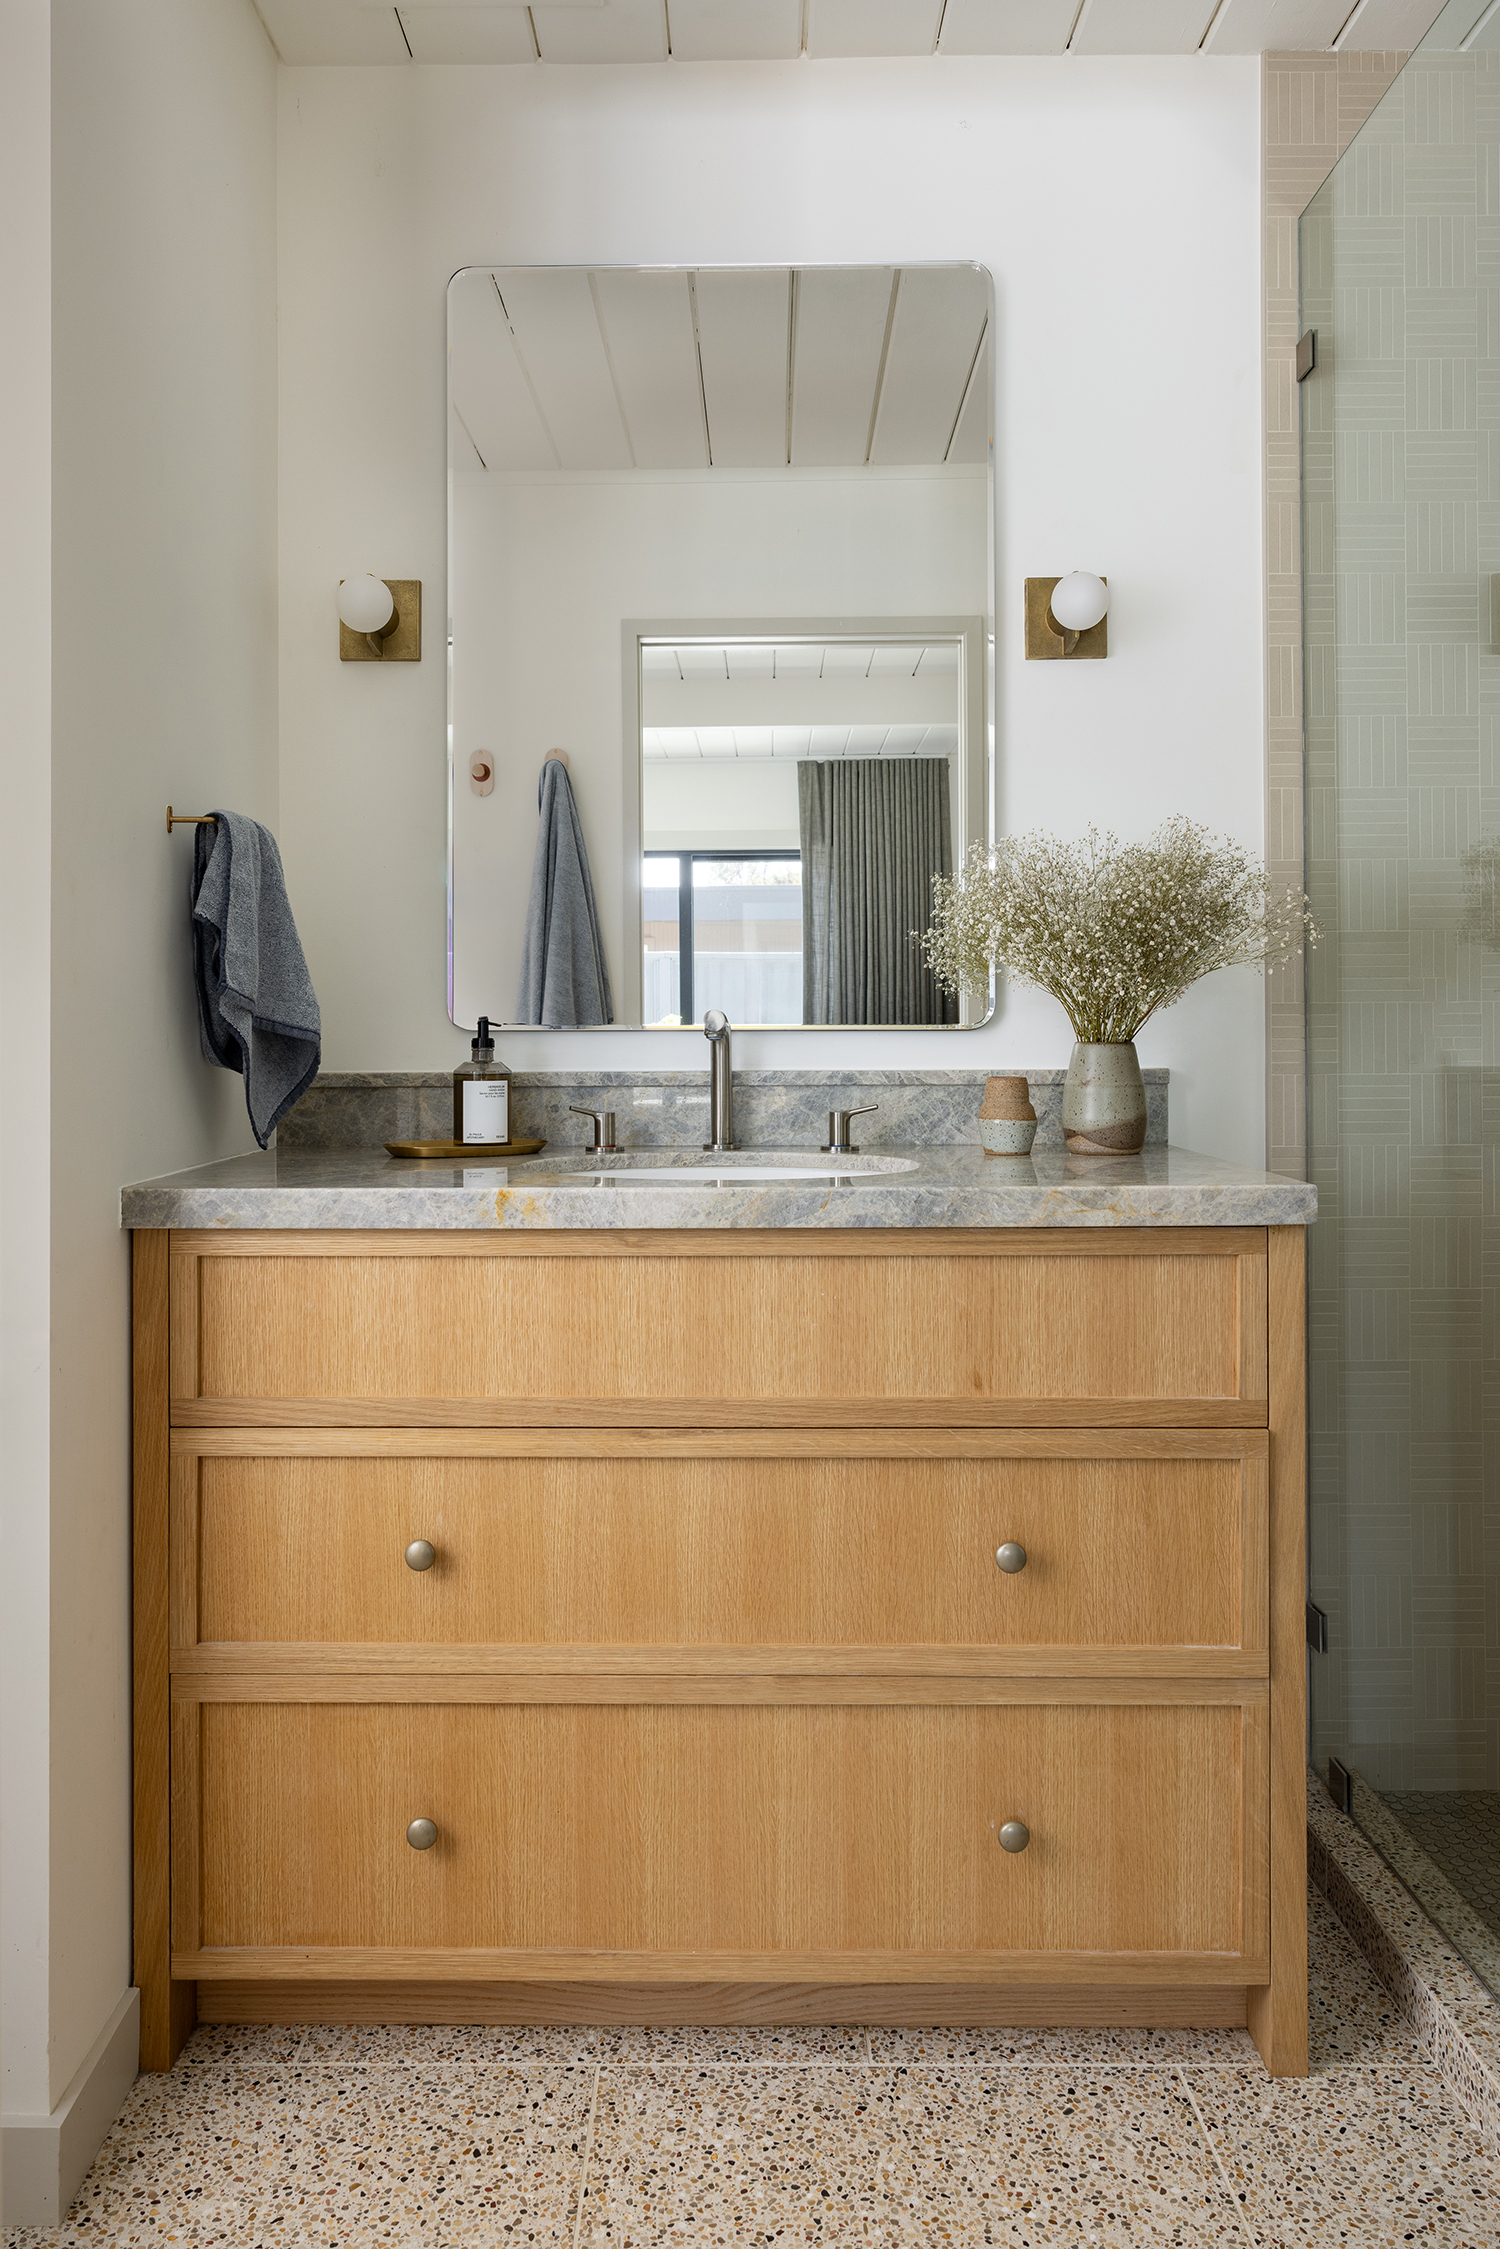 Bathroom in Eichler House by Katie Monkhouse